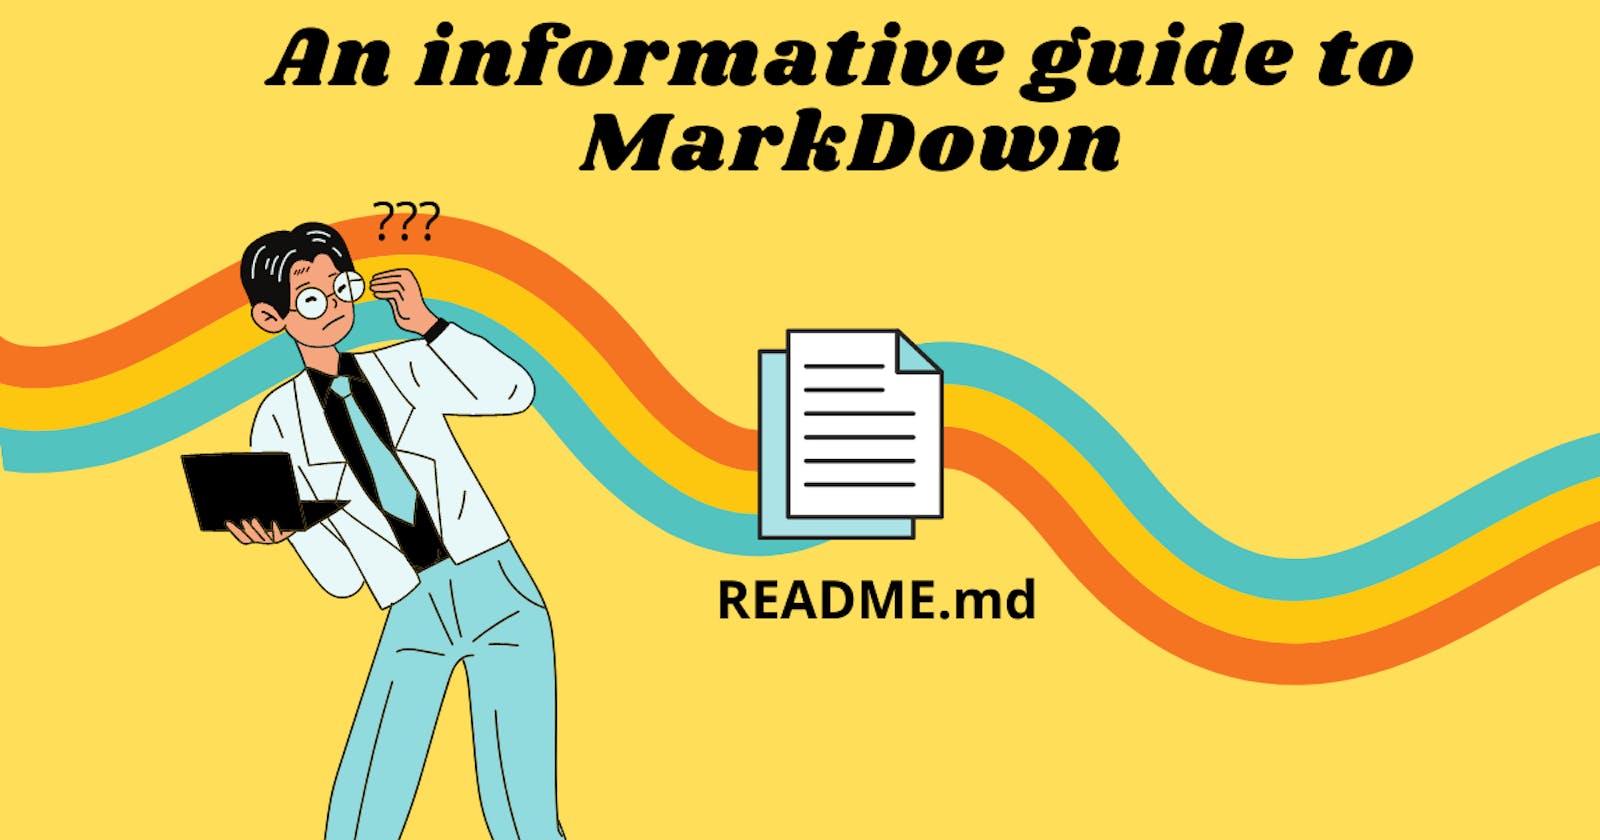 An Informative guide to Markdown